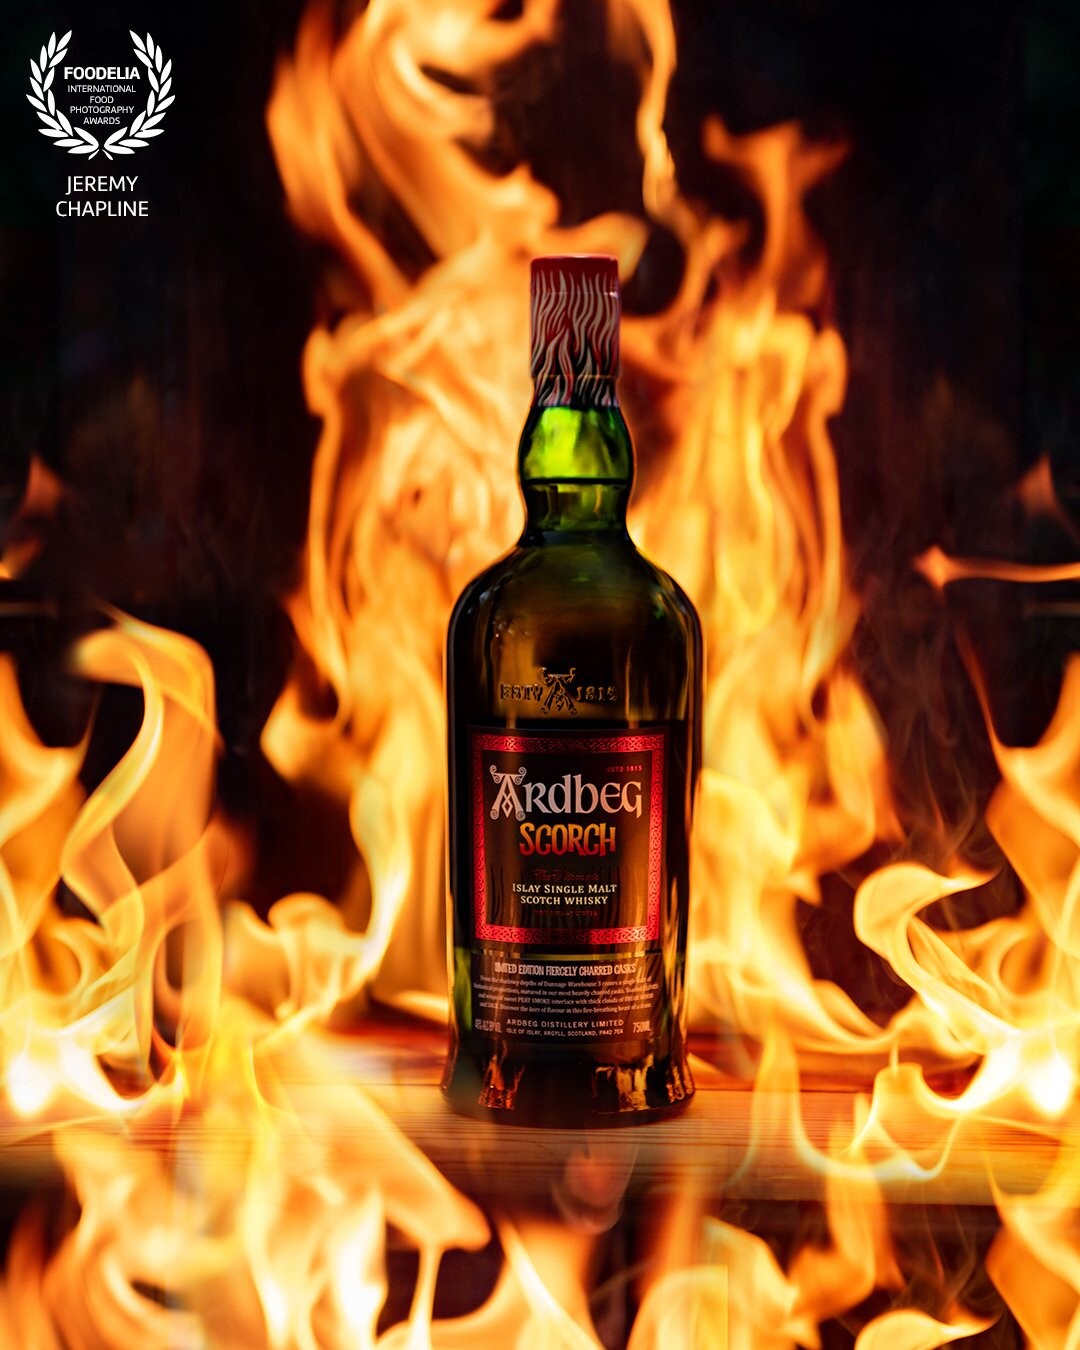 Building off the inspiration of heavily scorched barrel influence, I wanted to create an image that highlighted the fire used to create this wonderful whisky.